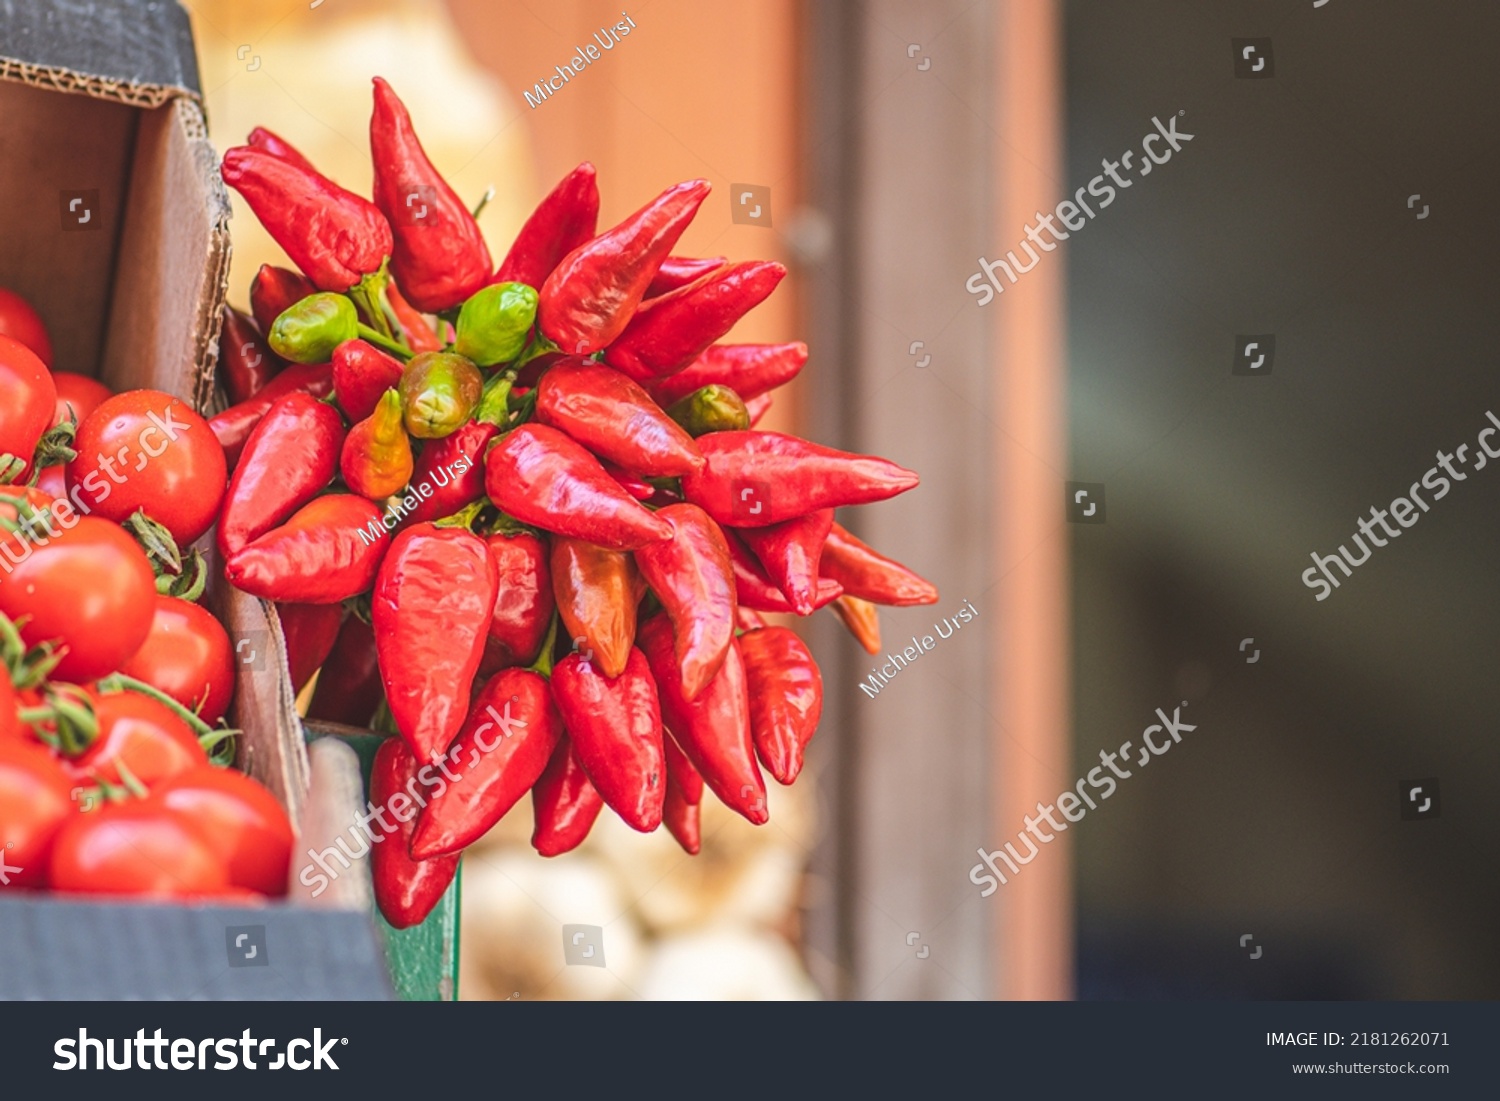 Bunch of red hot chili peppers hanging in a street food market, close up #2181262071